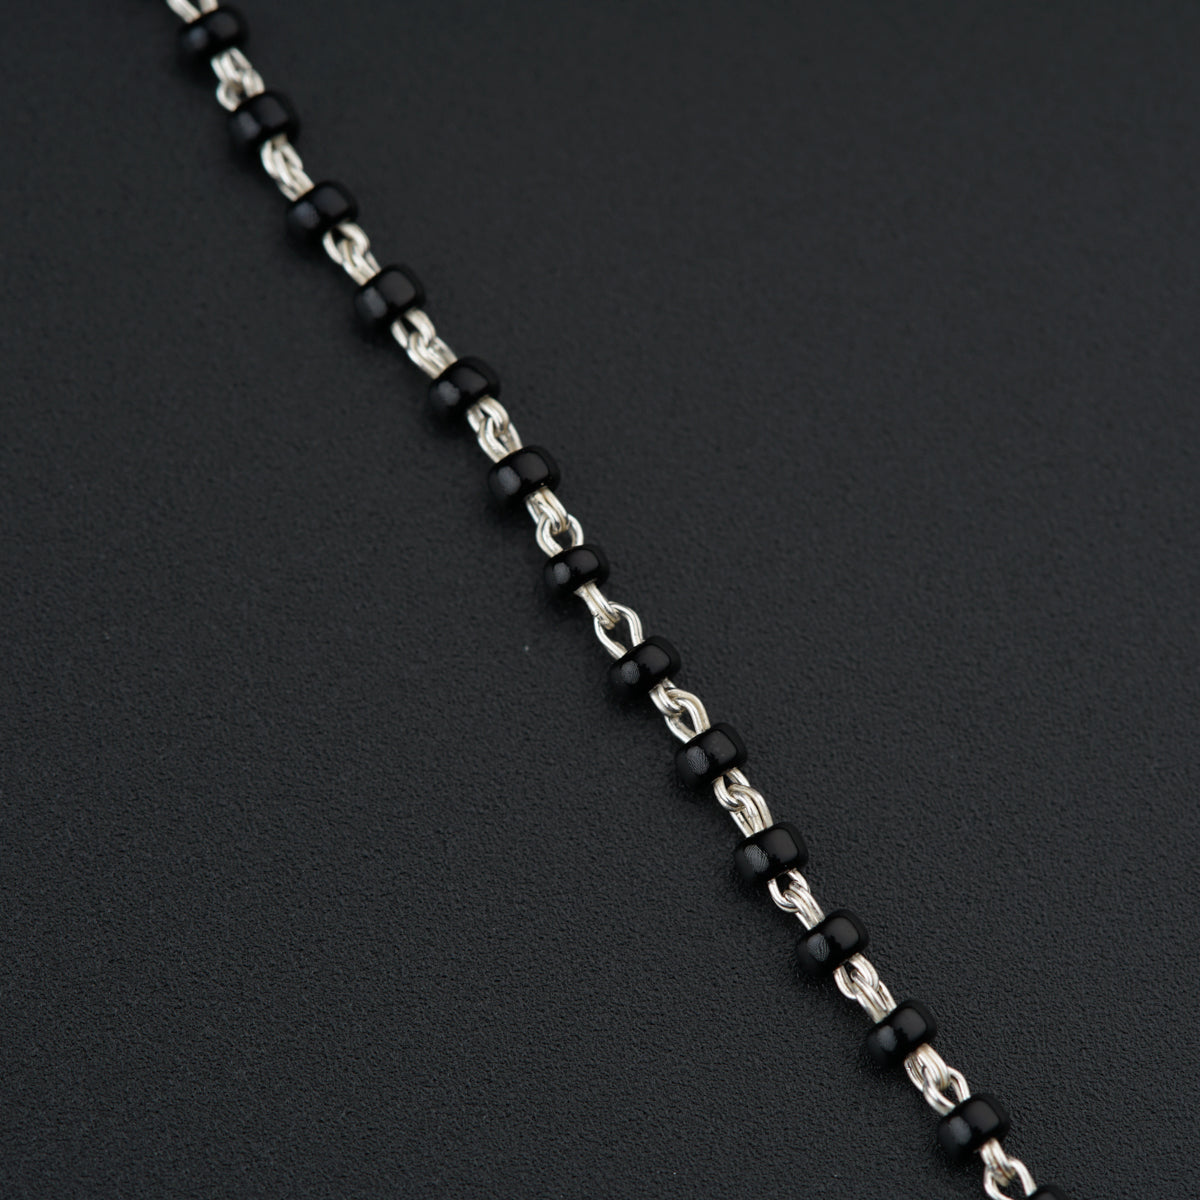 Handmade silver Mangalsutra with Pearls and Silver Beads